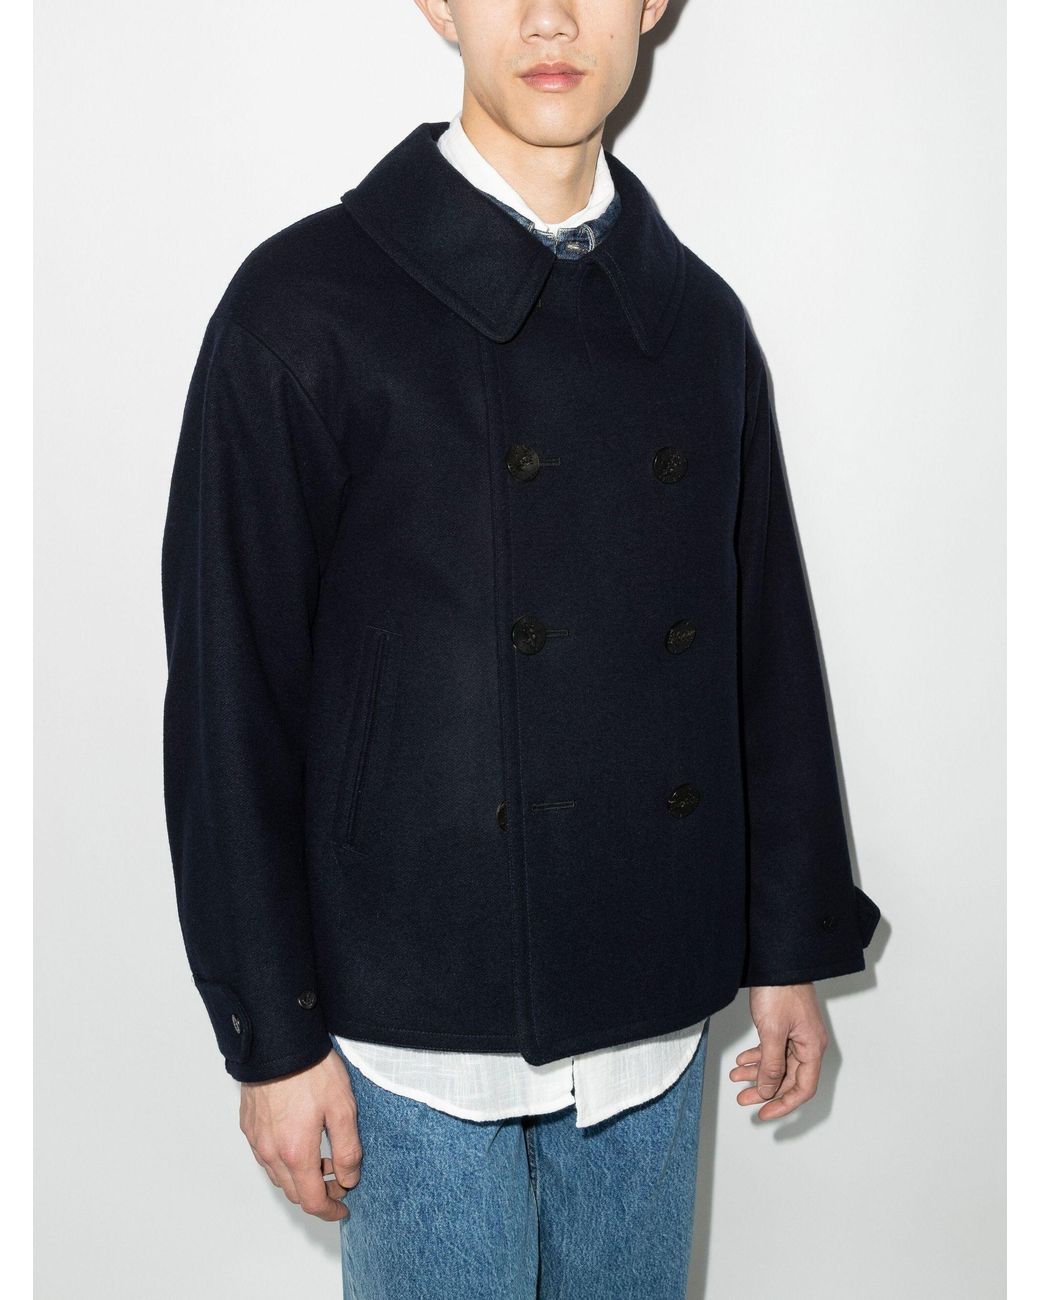 Visvim Pollack Double-breasted Peacoat - Men's - Wool/linen/flax